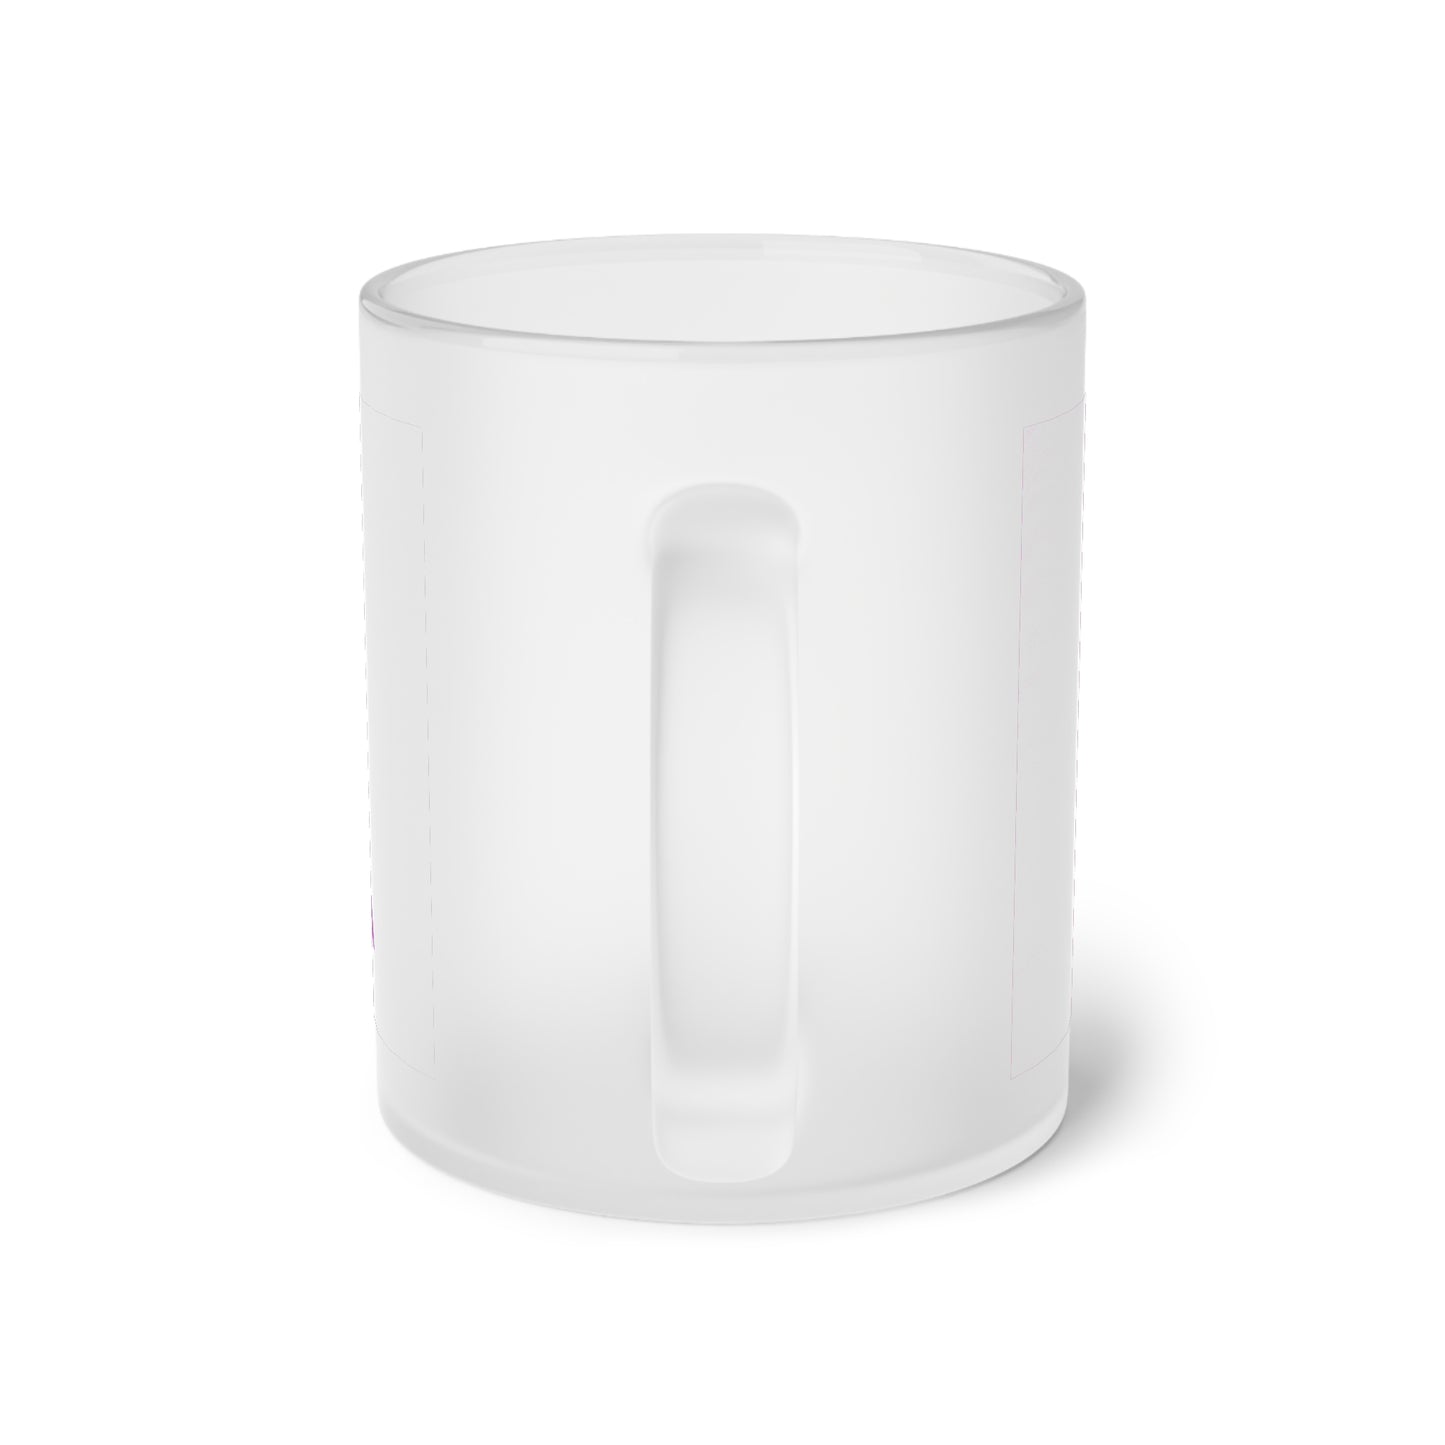 HHMM Signature Frosted Glass Mug